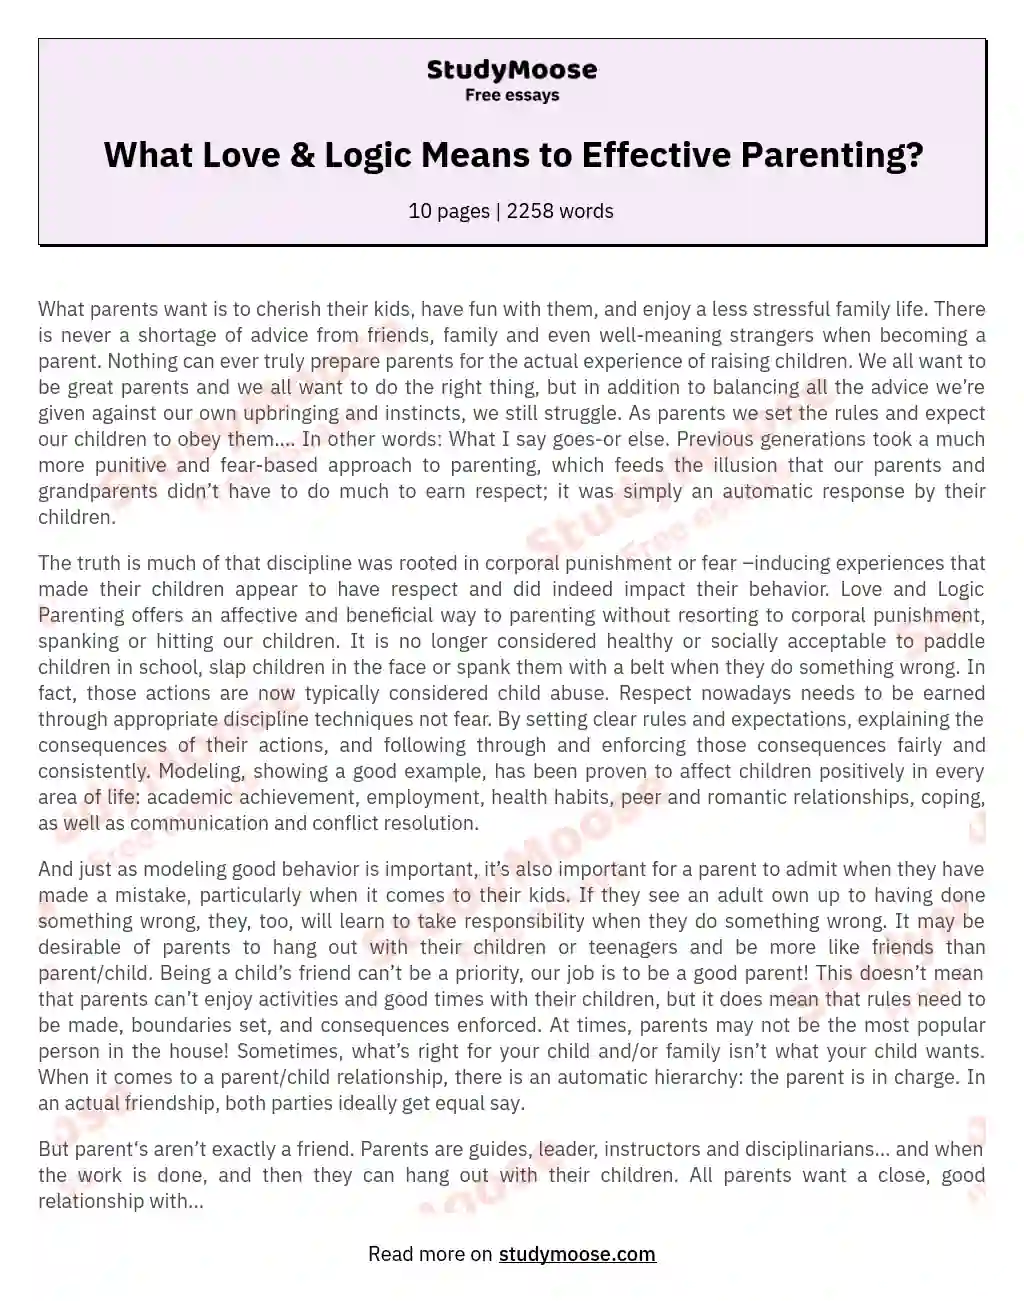 What Love & Logic Means to Effective Parenting? essay